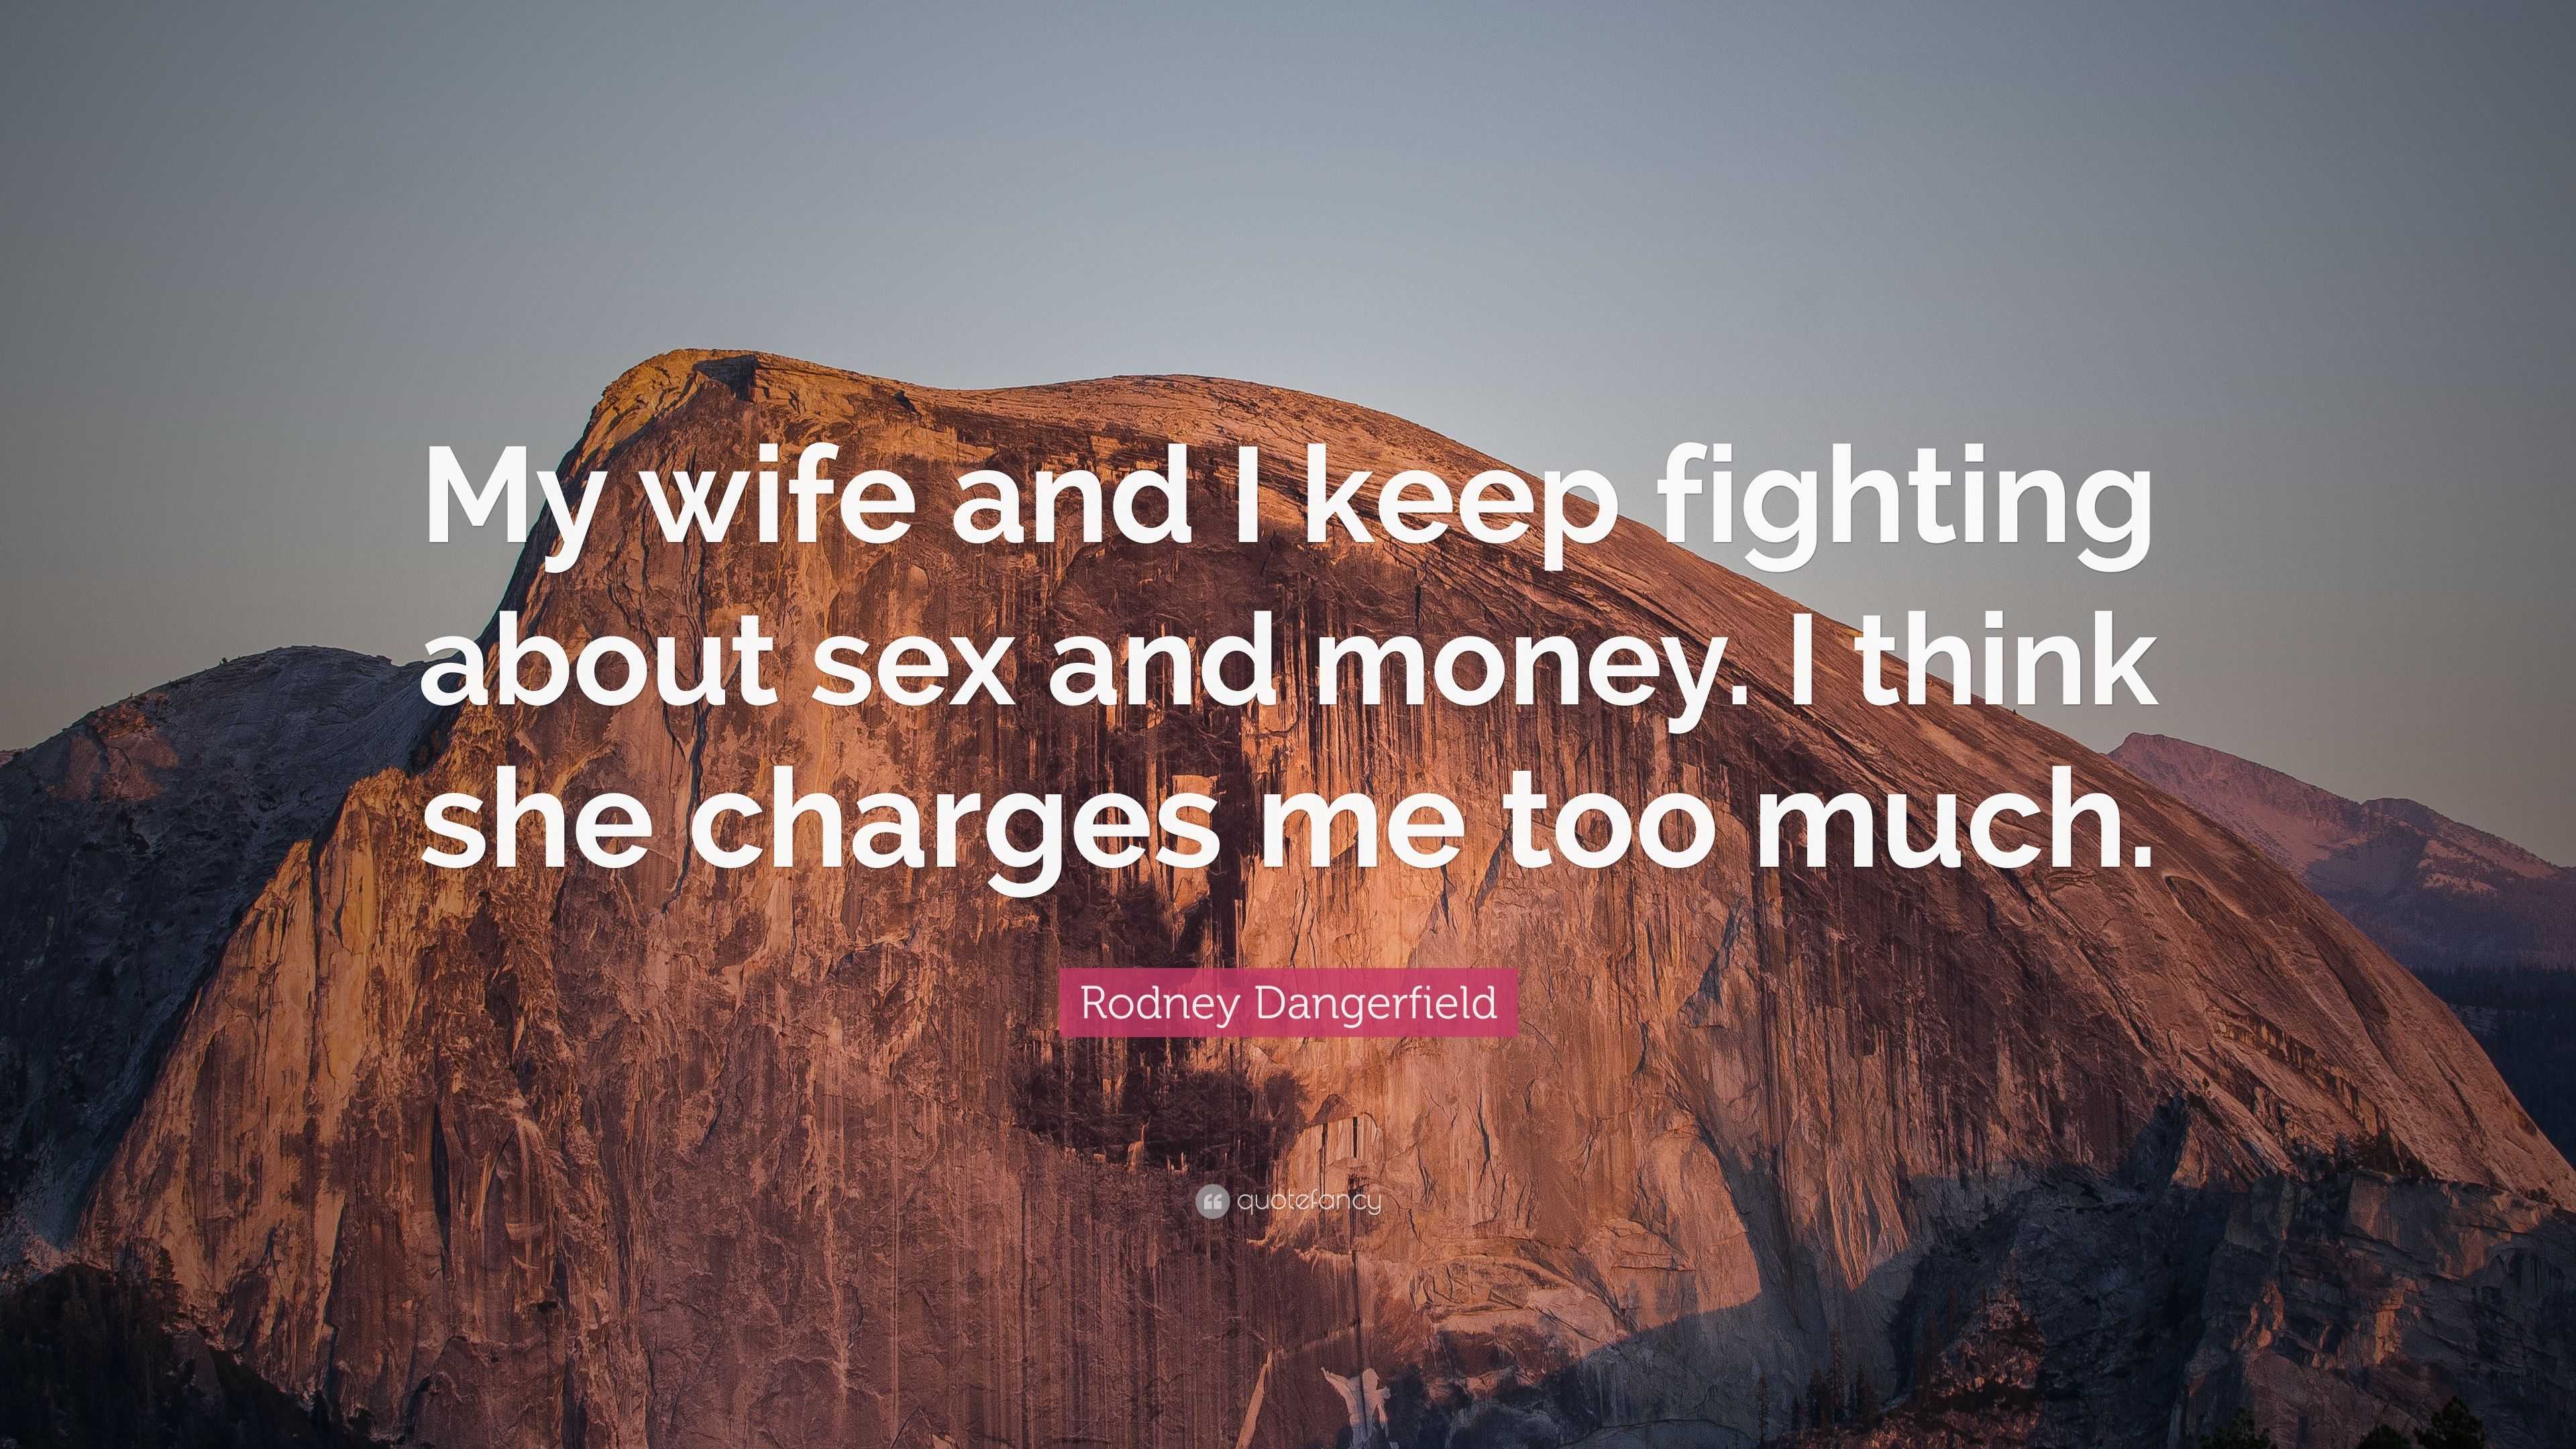 Rodney Dangerfield Quote “My wife and I keep fighting about sex and money photo